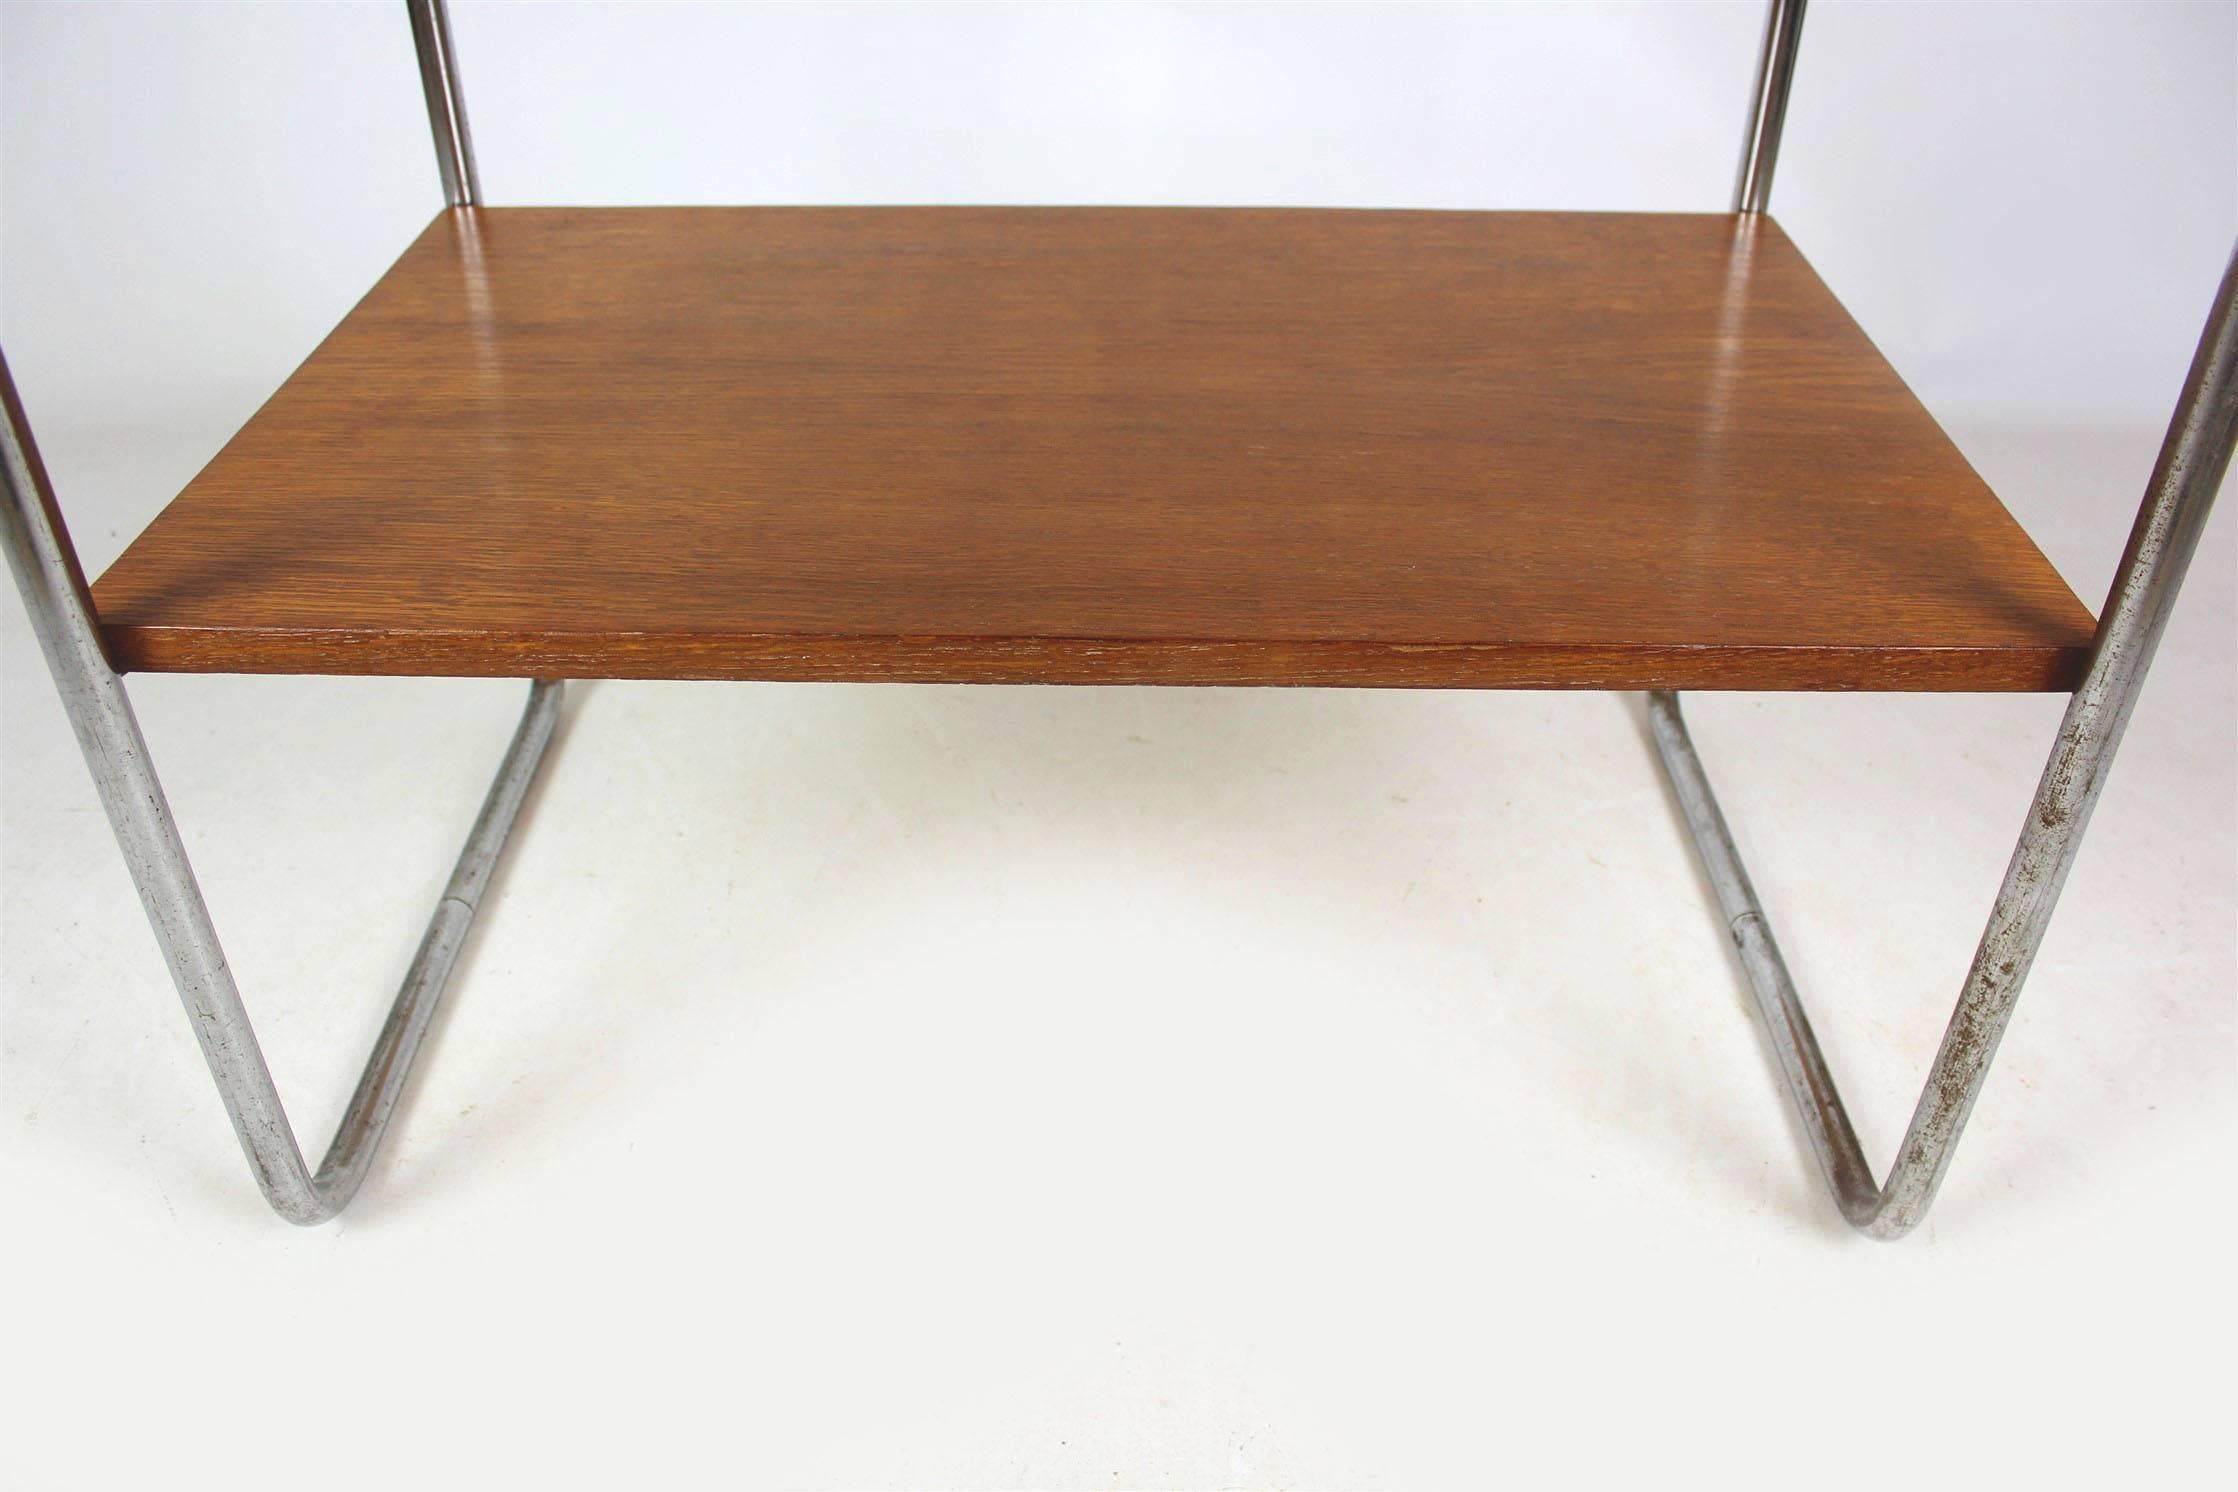 This vintage model B12 console table was designed by Marcel Breuer for Thonet in the 1930s. It features two shelves supported by a chrome tubular steel frame. Kept in original, good condition.